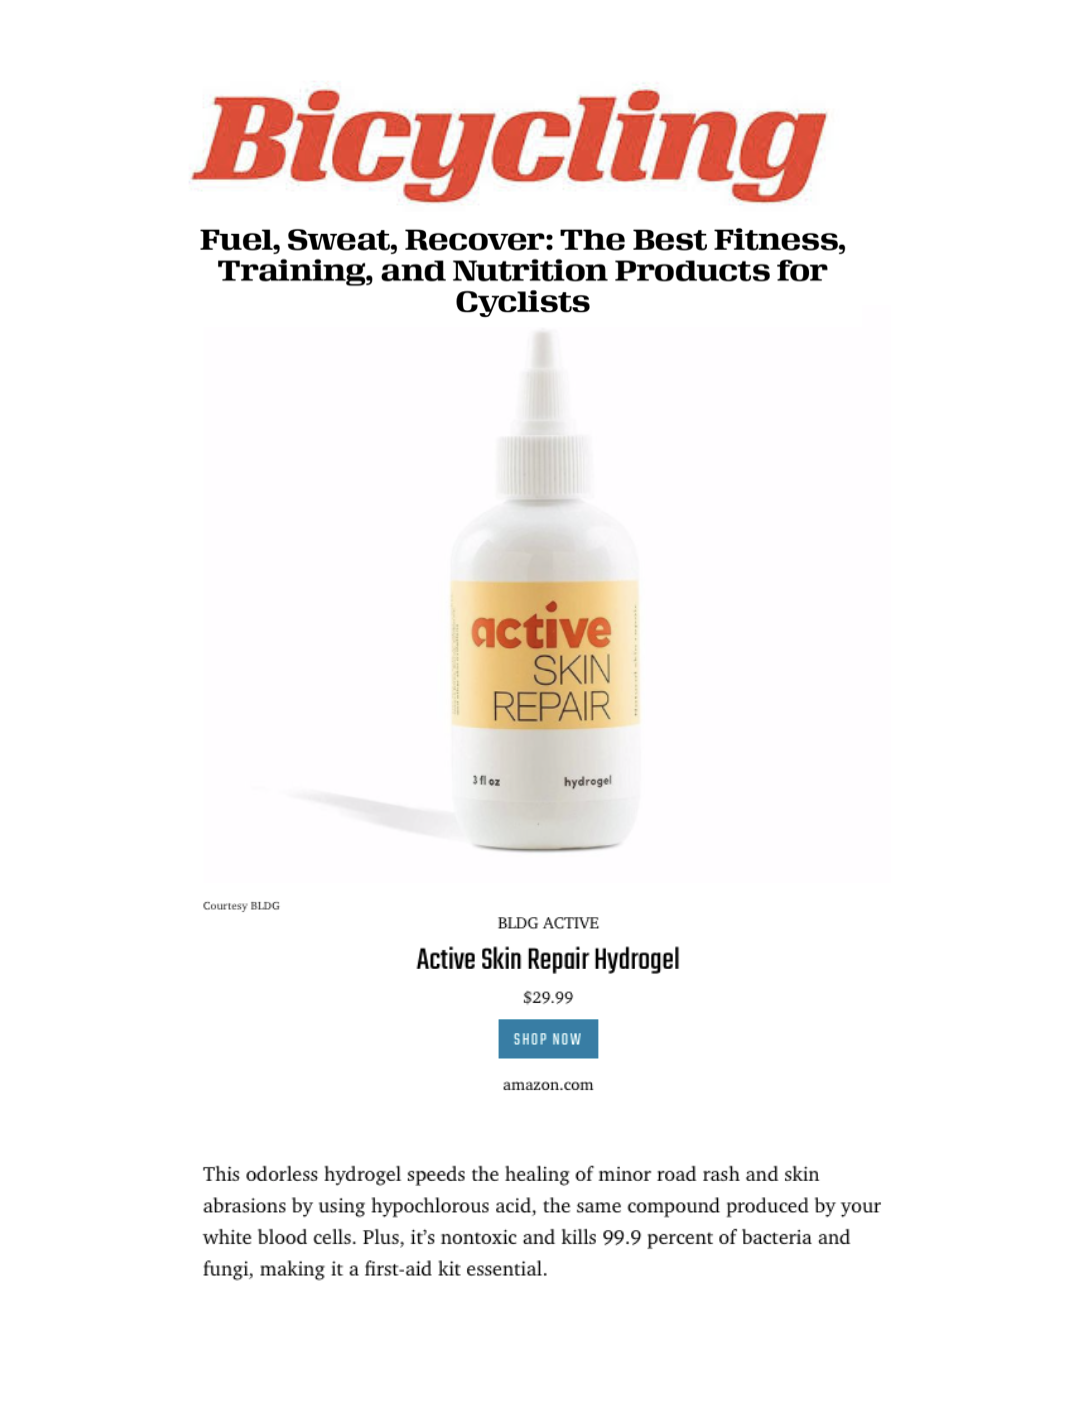 Bicycling Magazine Names Active Hydrogel to 2020 Awards List